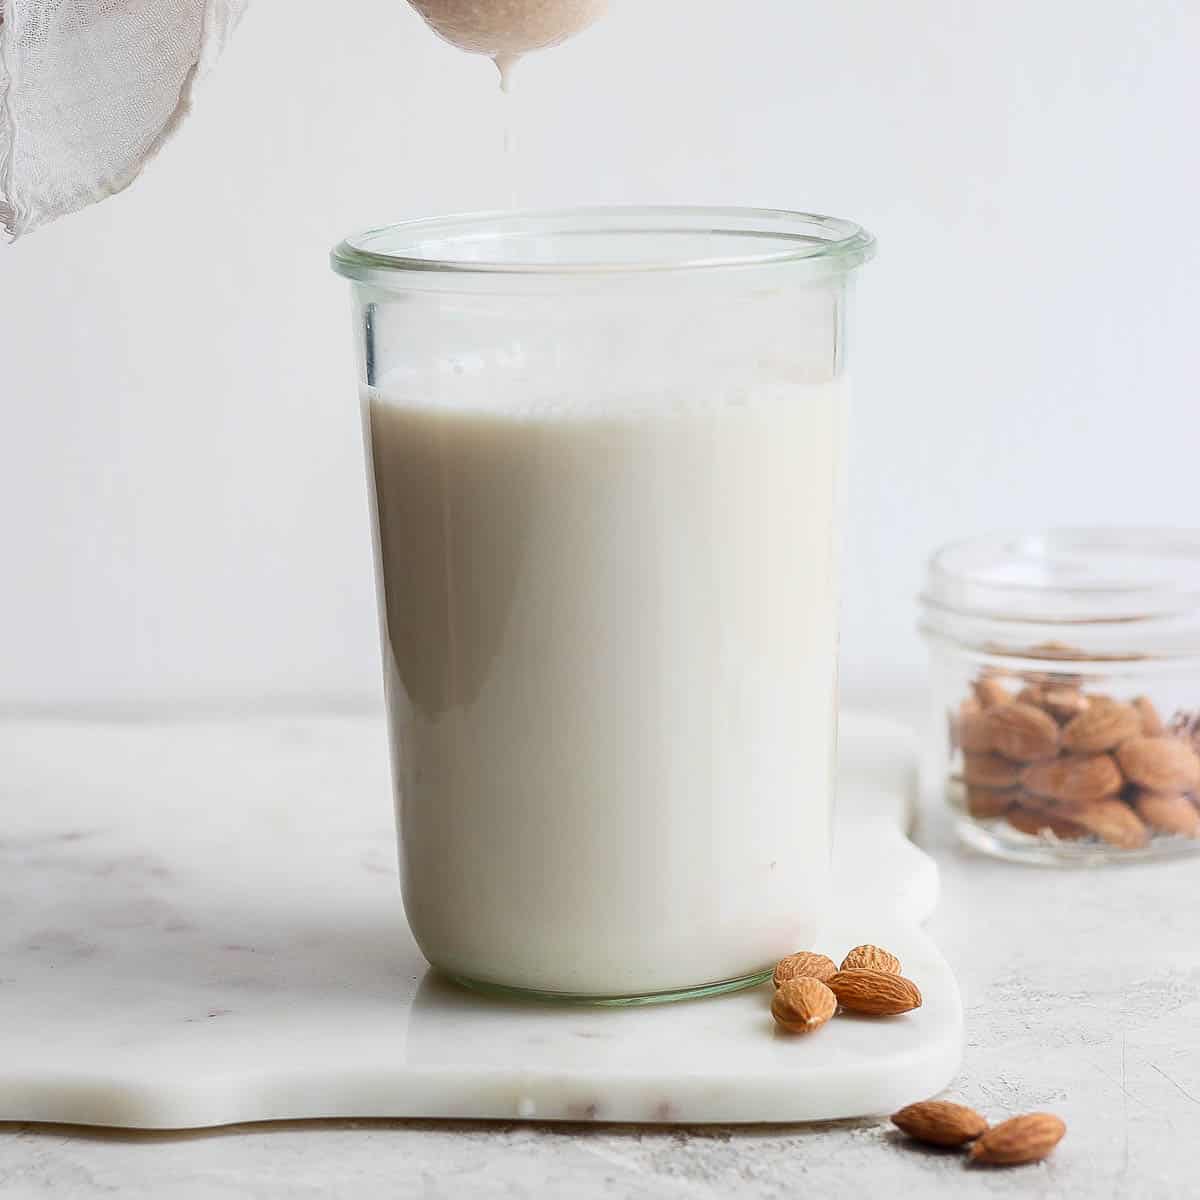 How to Make Almond Milk - The Wooden Skillet